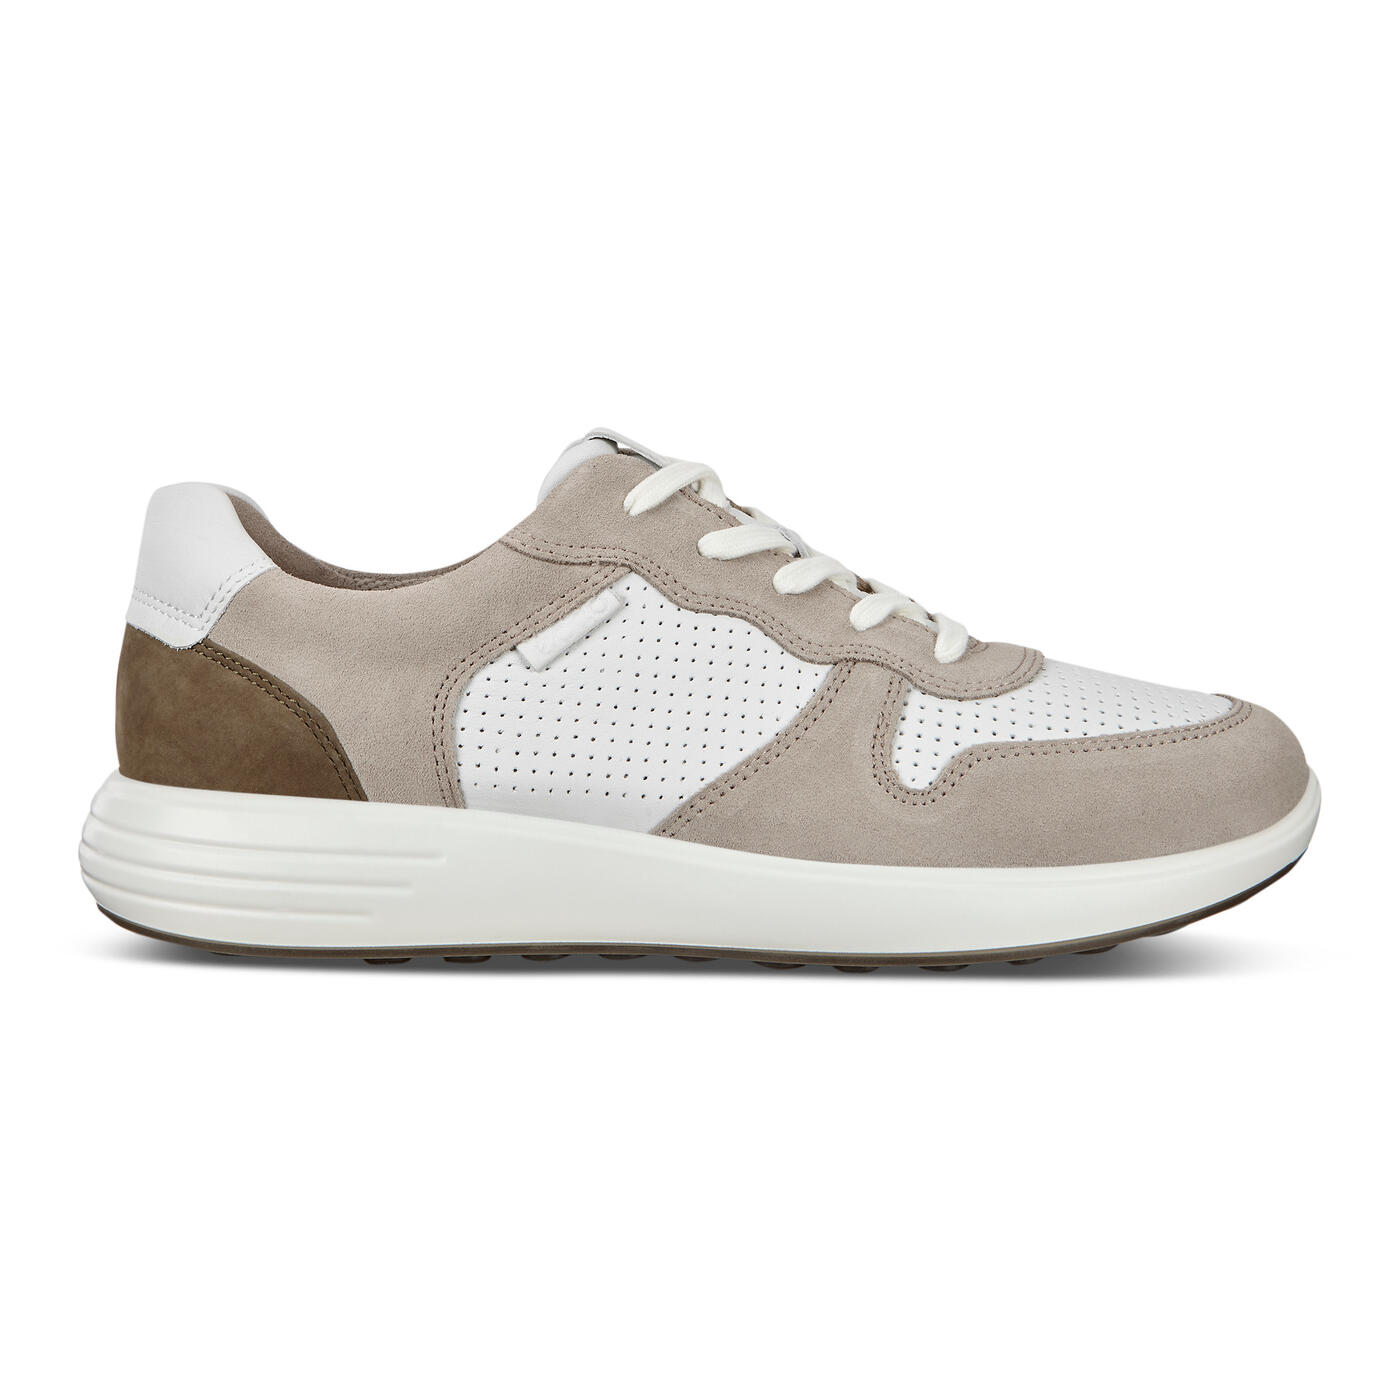 Men's Soft 7 Runner Perforated Sneakers | ECCO® Shoes